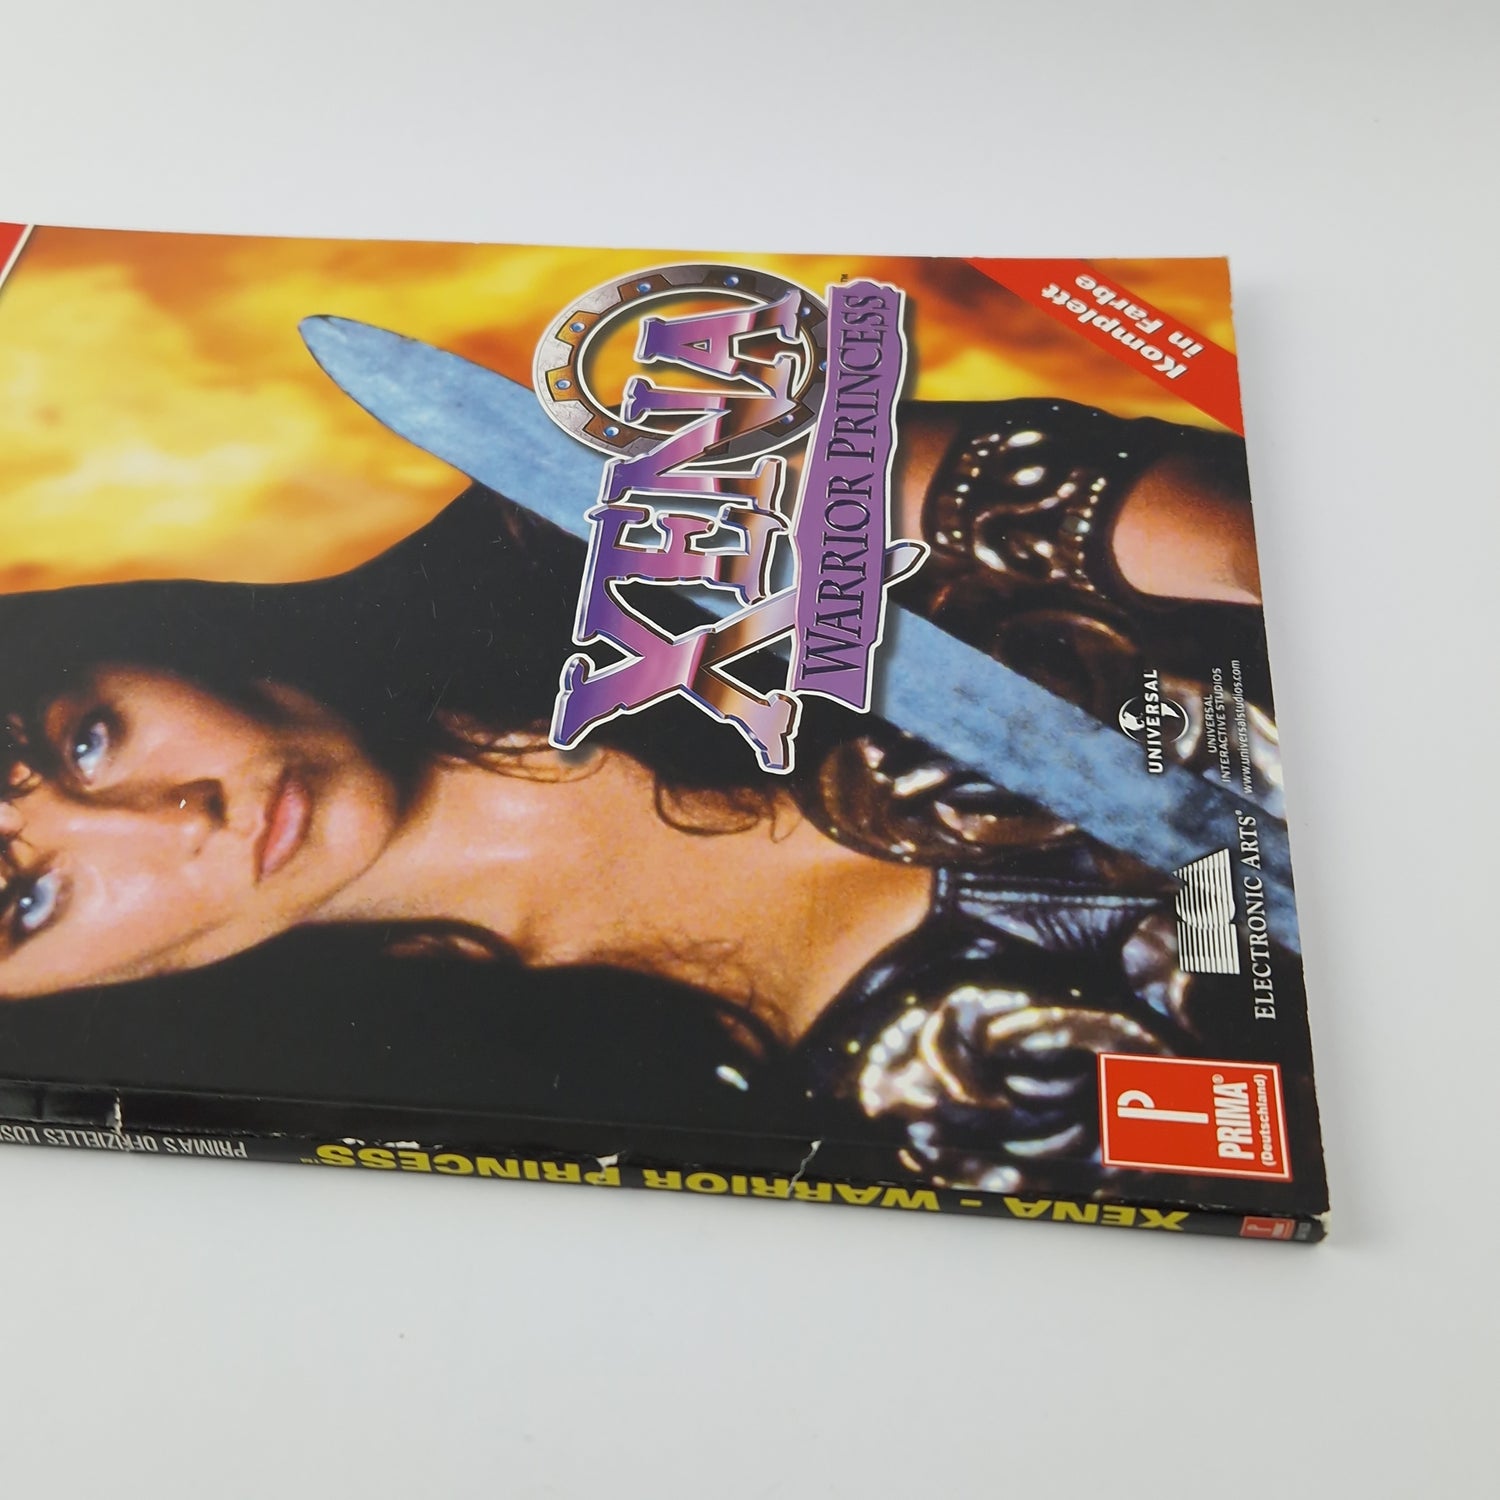 Prima's solution book for the game: XENA Warrior Princess - Game Advisor N64